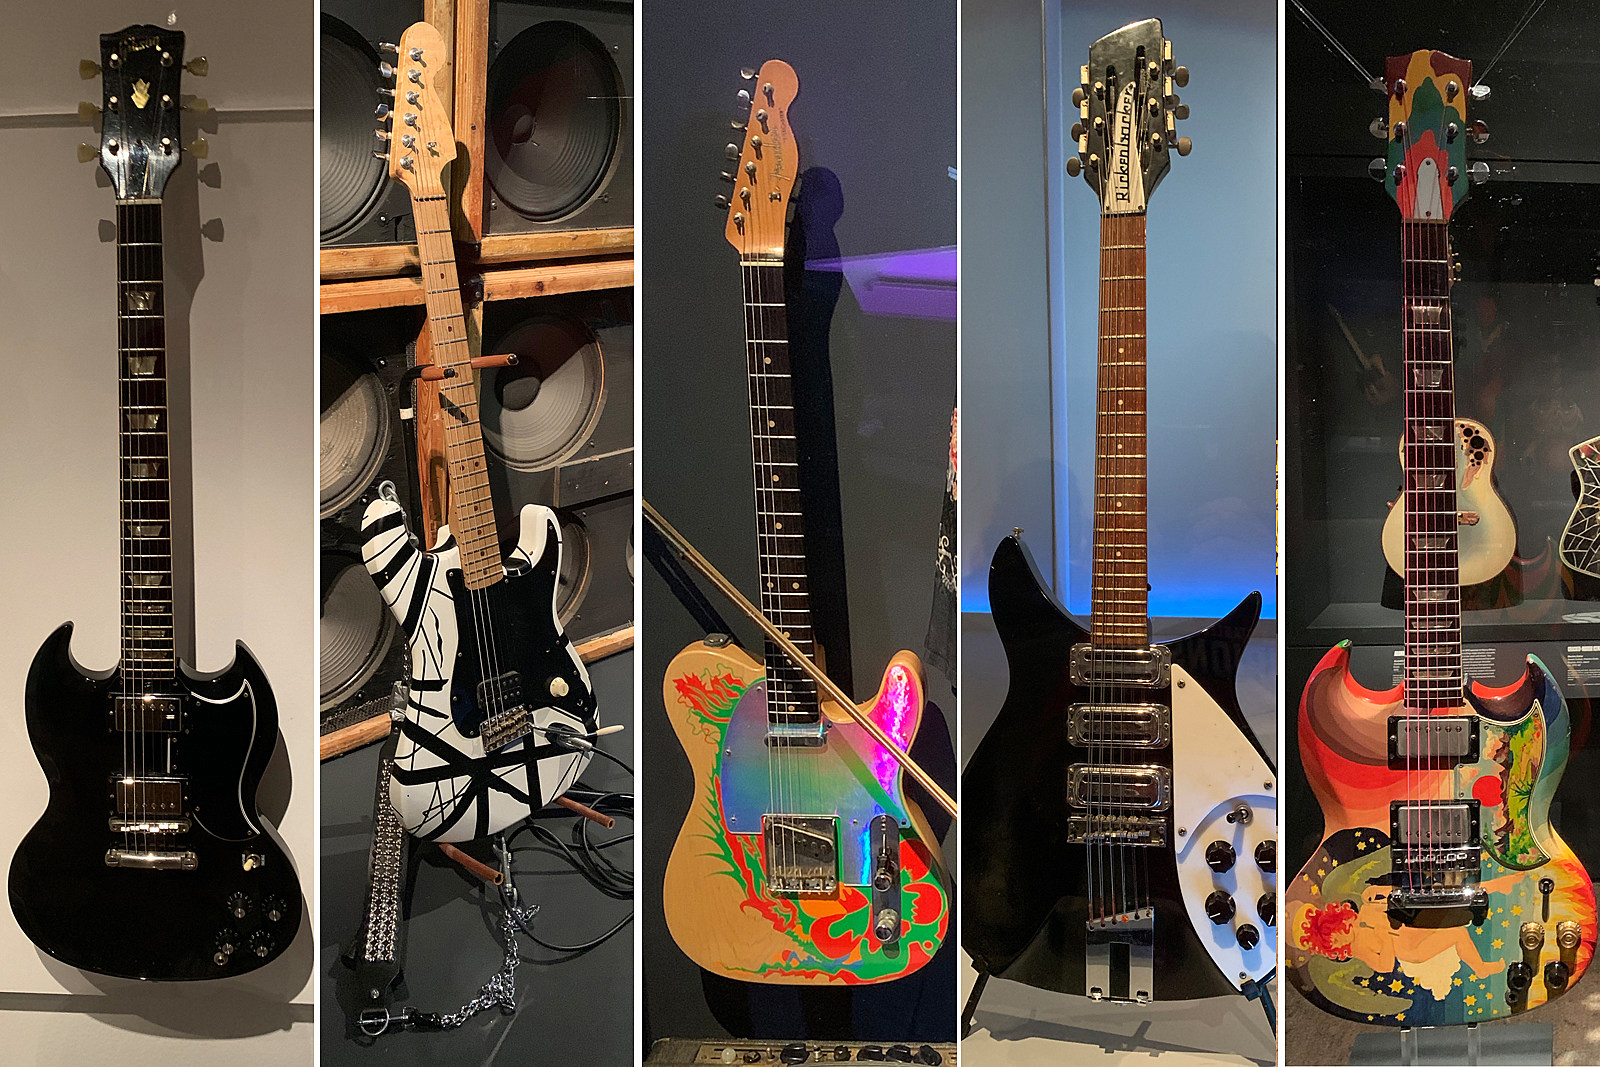 Rock Hall Celebrates Guitars and More in 'Play It Loud' Exhibit